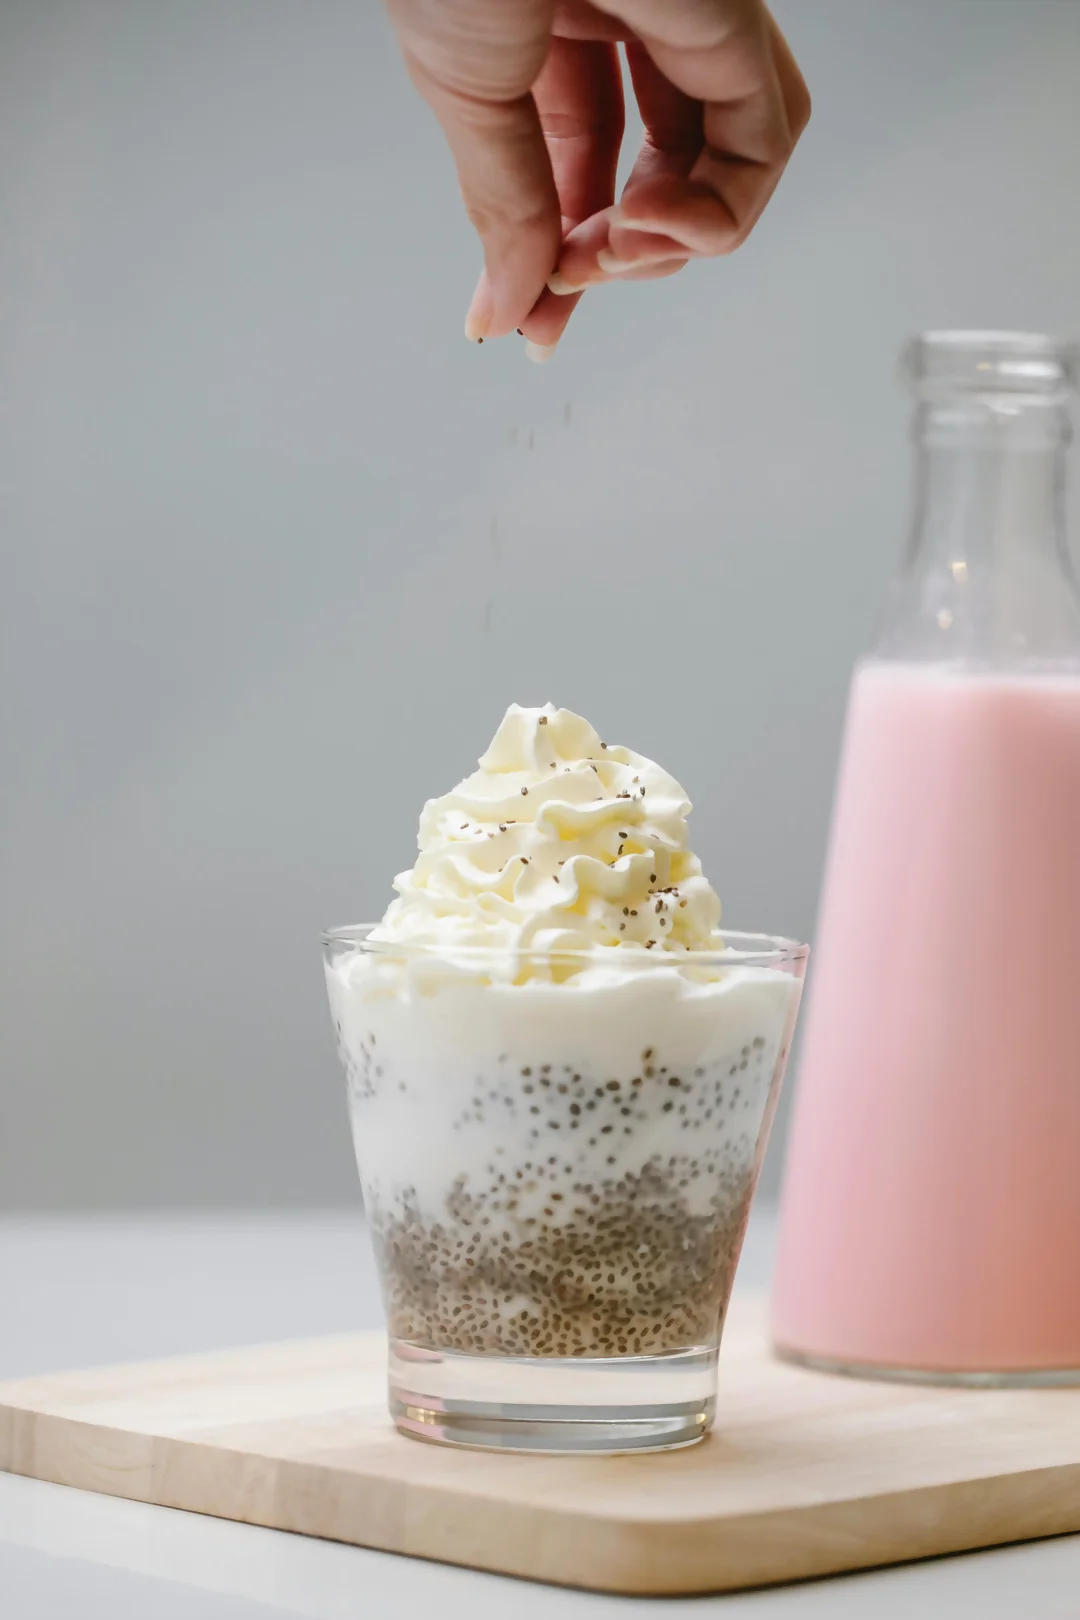 Chia seeds with yogurt or cottage cheese